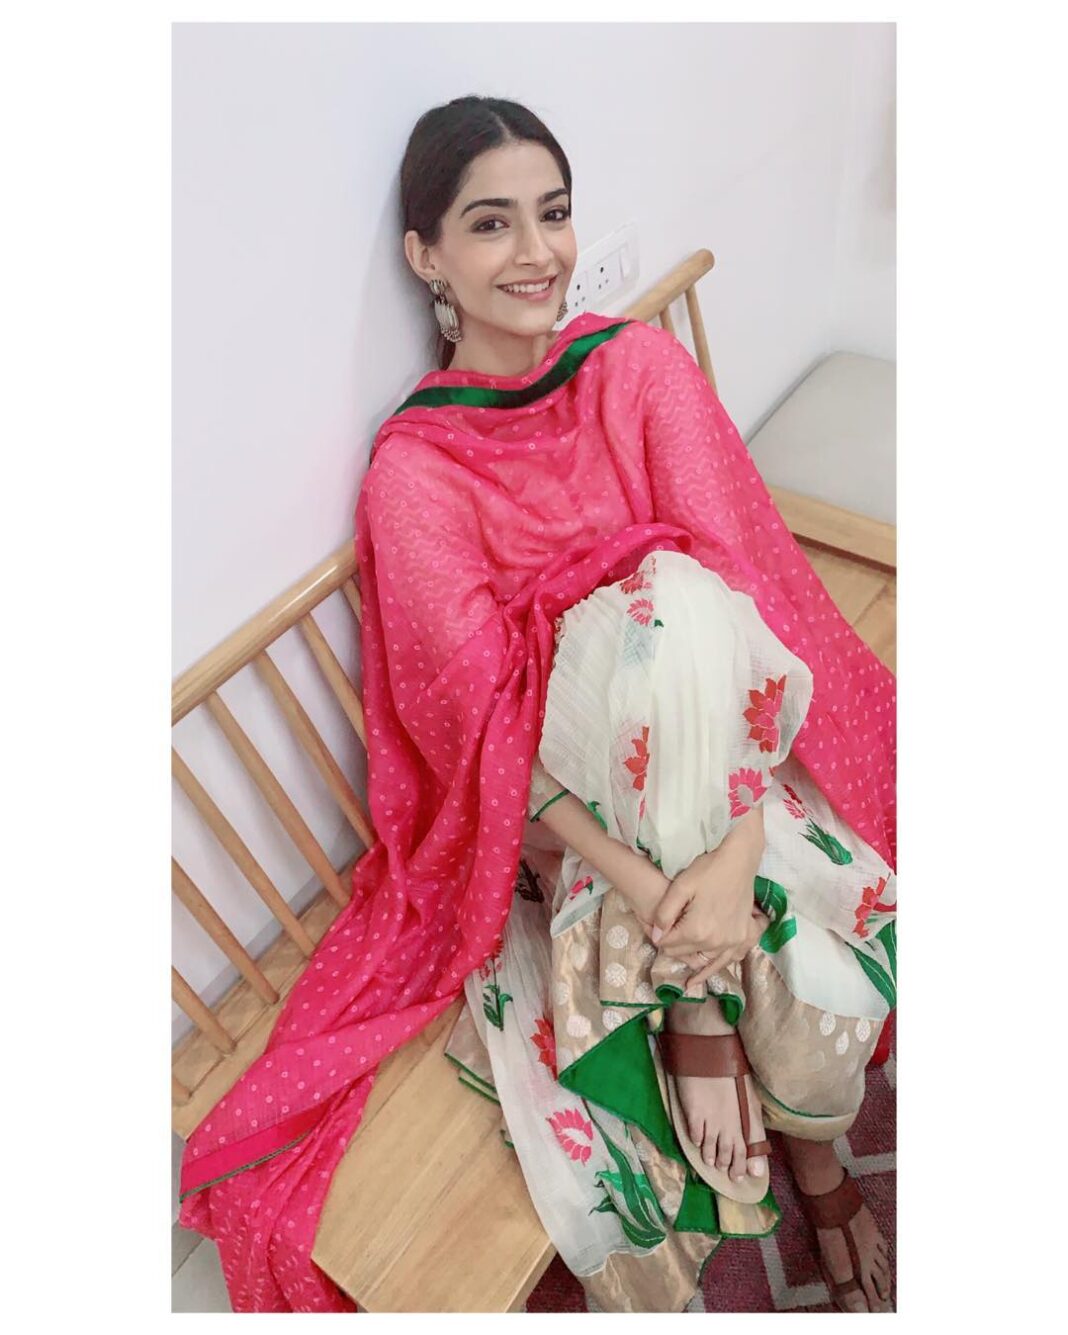 Sonam Kapoor Instagram - @priya27ahuja thank you for always buying me the most beautiful gifts... new outfit for eid! Love you mom!